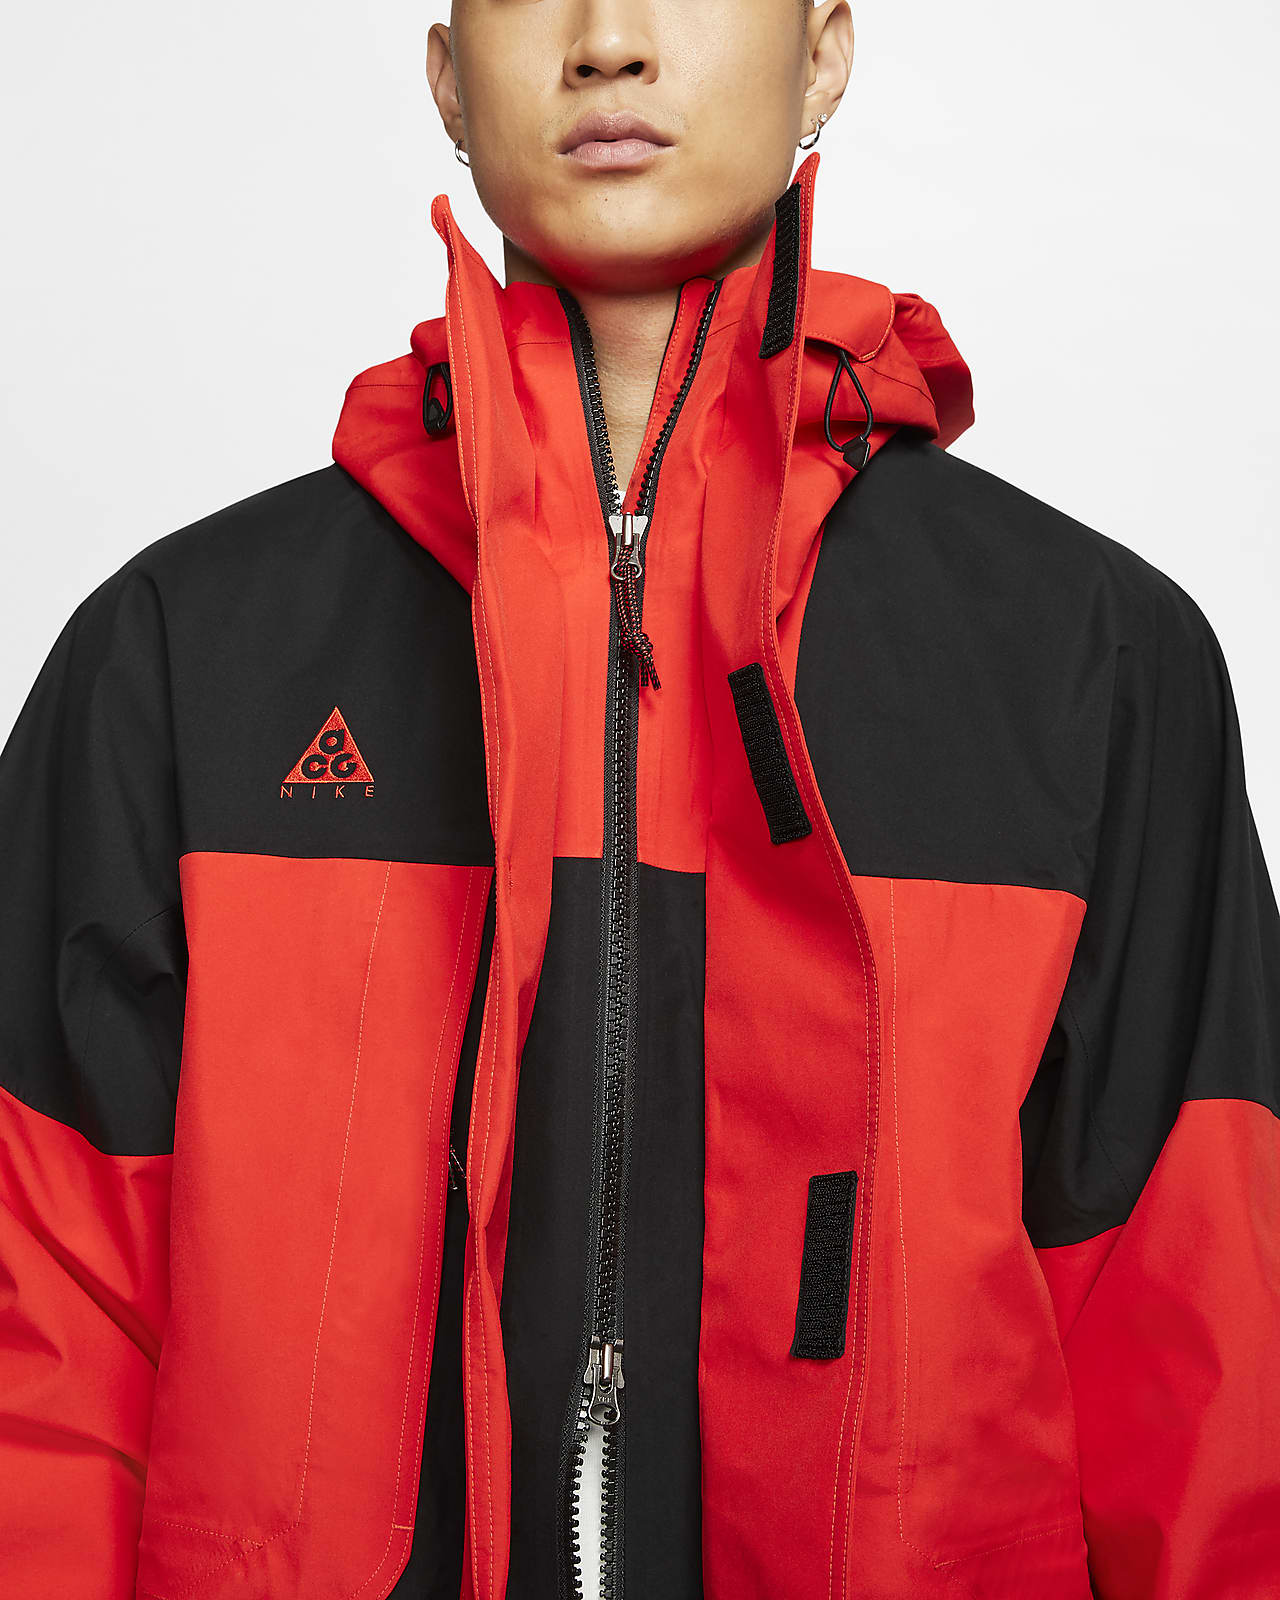 nike all conditions gear jacket